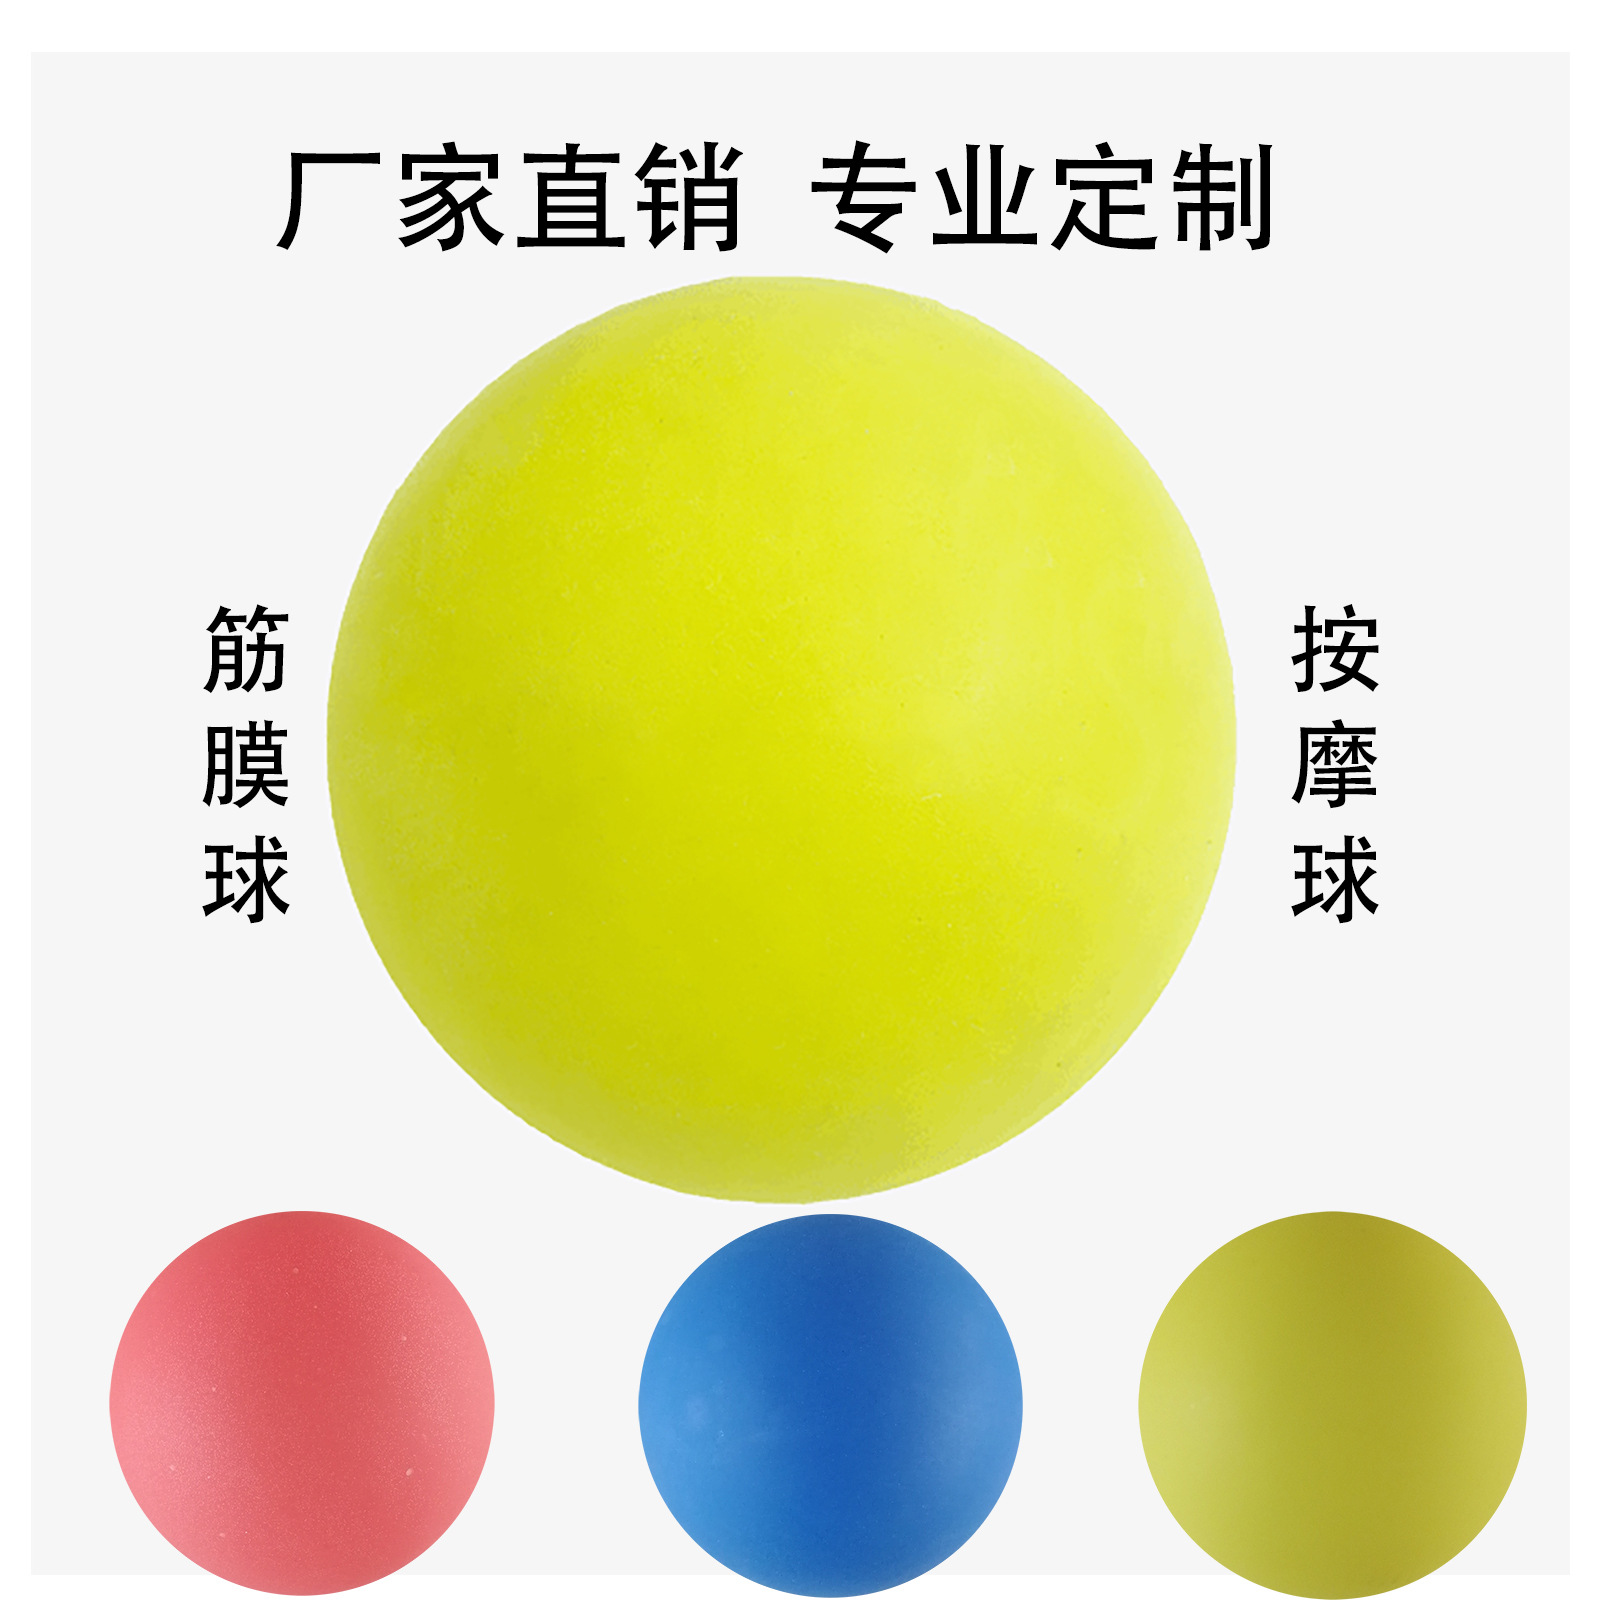 Hockey Fascial bulb 6.5cm massage yoga Practice Muscle relaxation Indoor sport Manufactor major customized